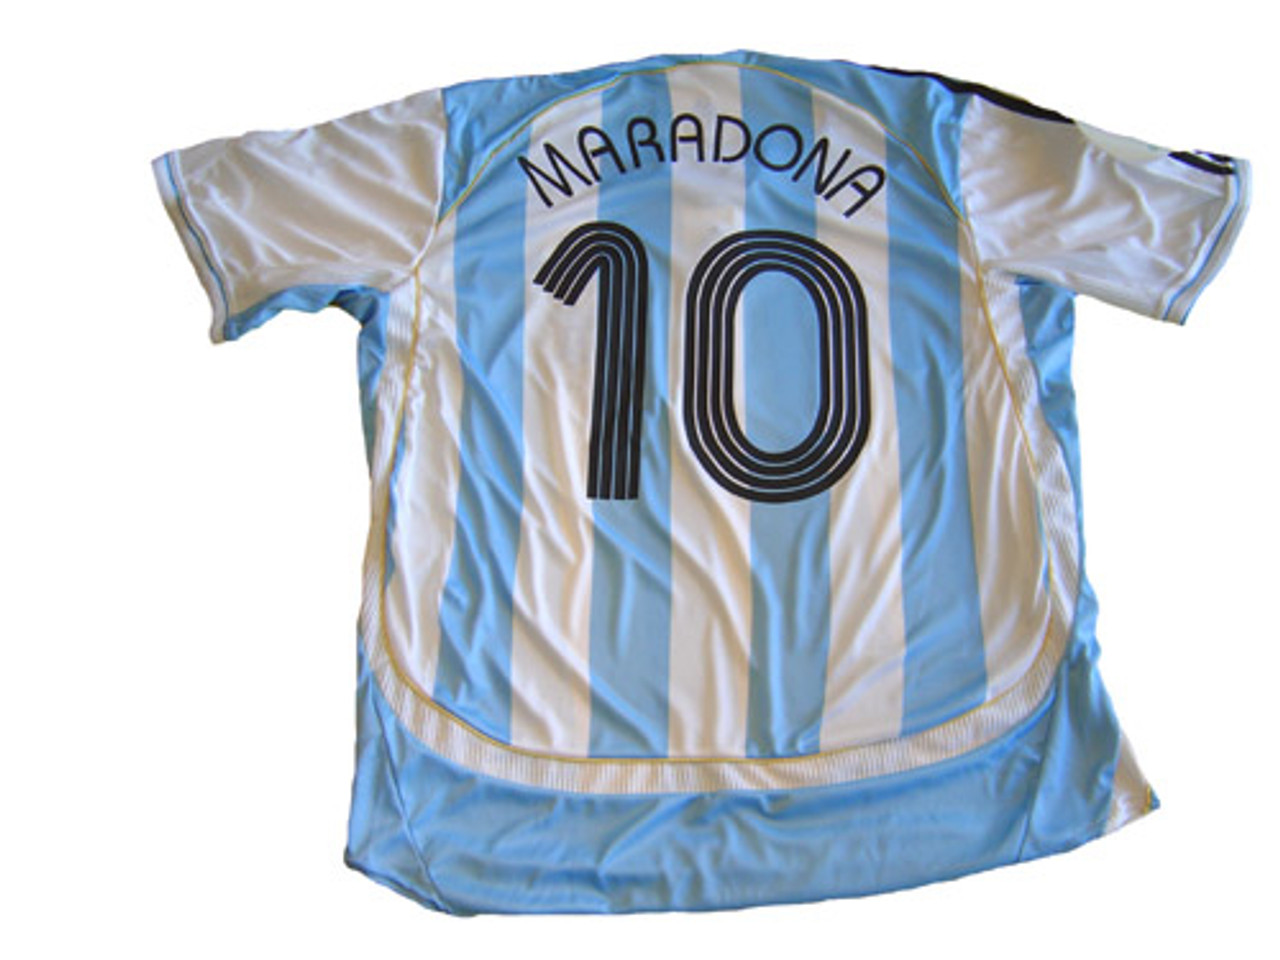 Argentina 2006 World Cup Retro Home Jersey